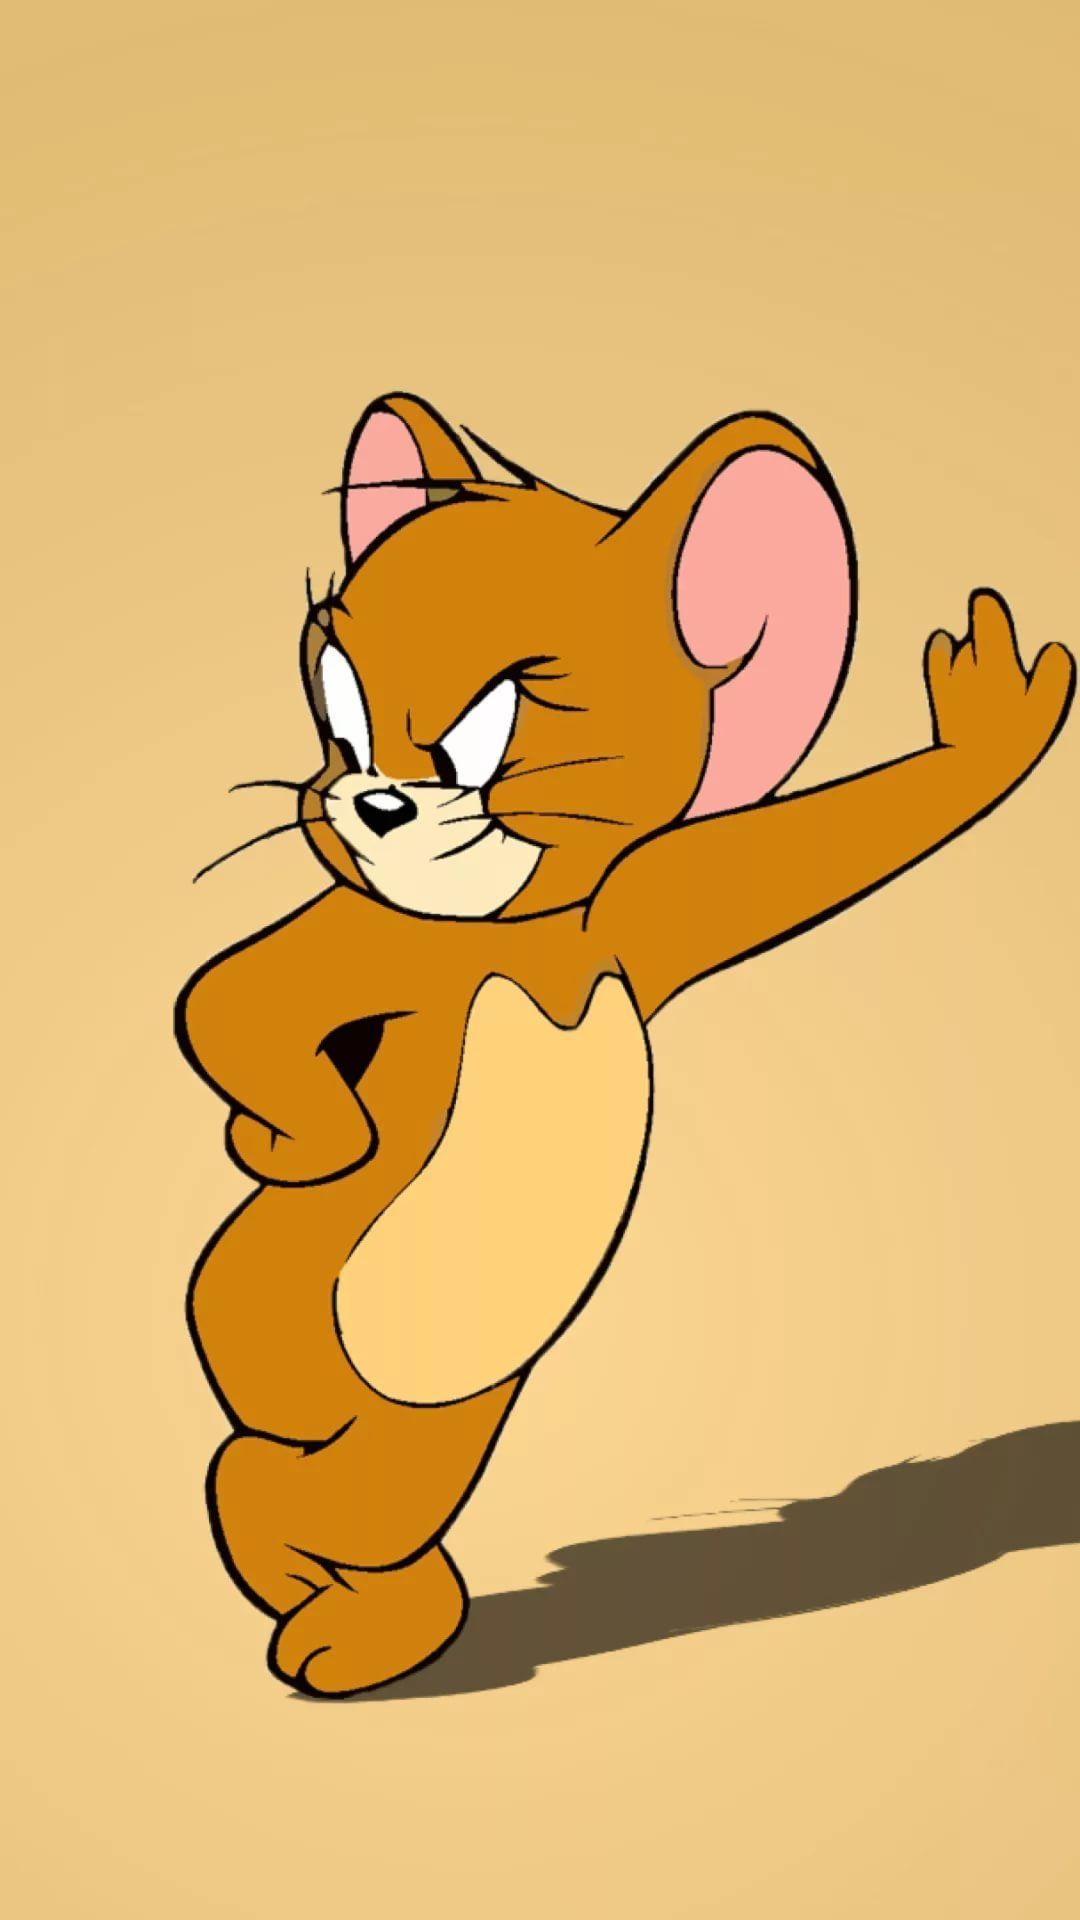 Tom N Jerry Hd wallpaper by Roc_kY - Download on ZEDGE™ | 8a84